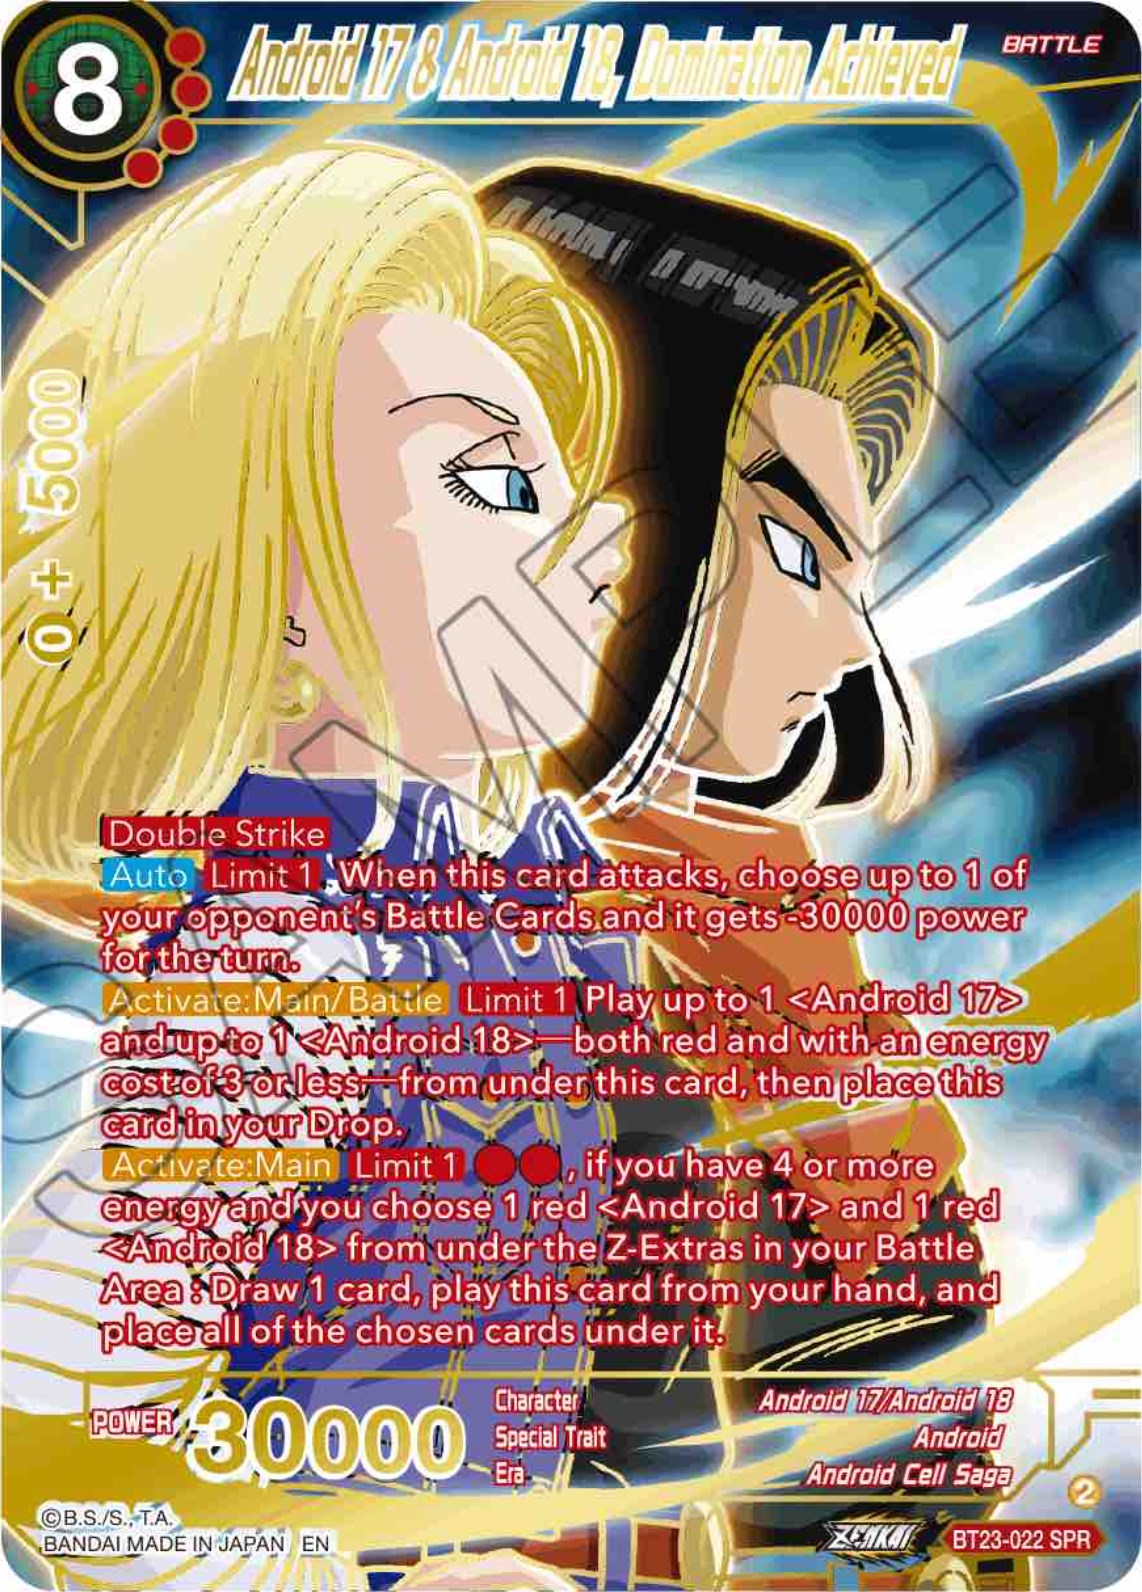 Android 17 & Android 18, Domination Achieved (SPR) (BT23-022) [Perfect Combination] | Shuffle n Cut Hobbies & Games